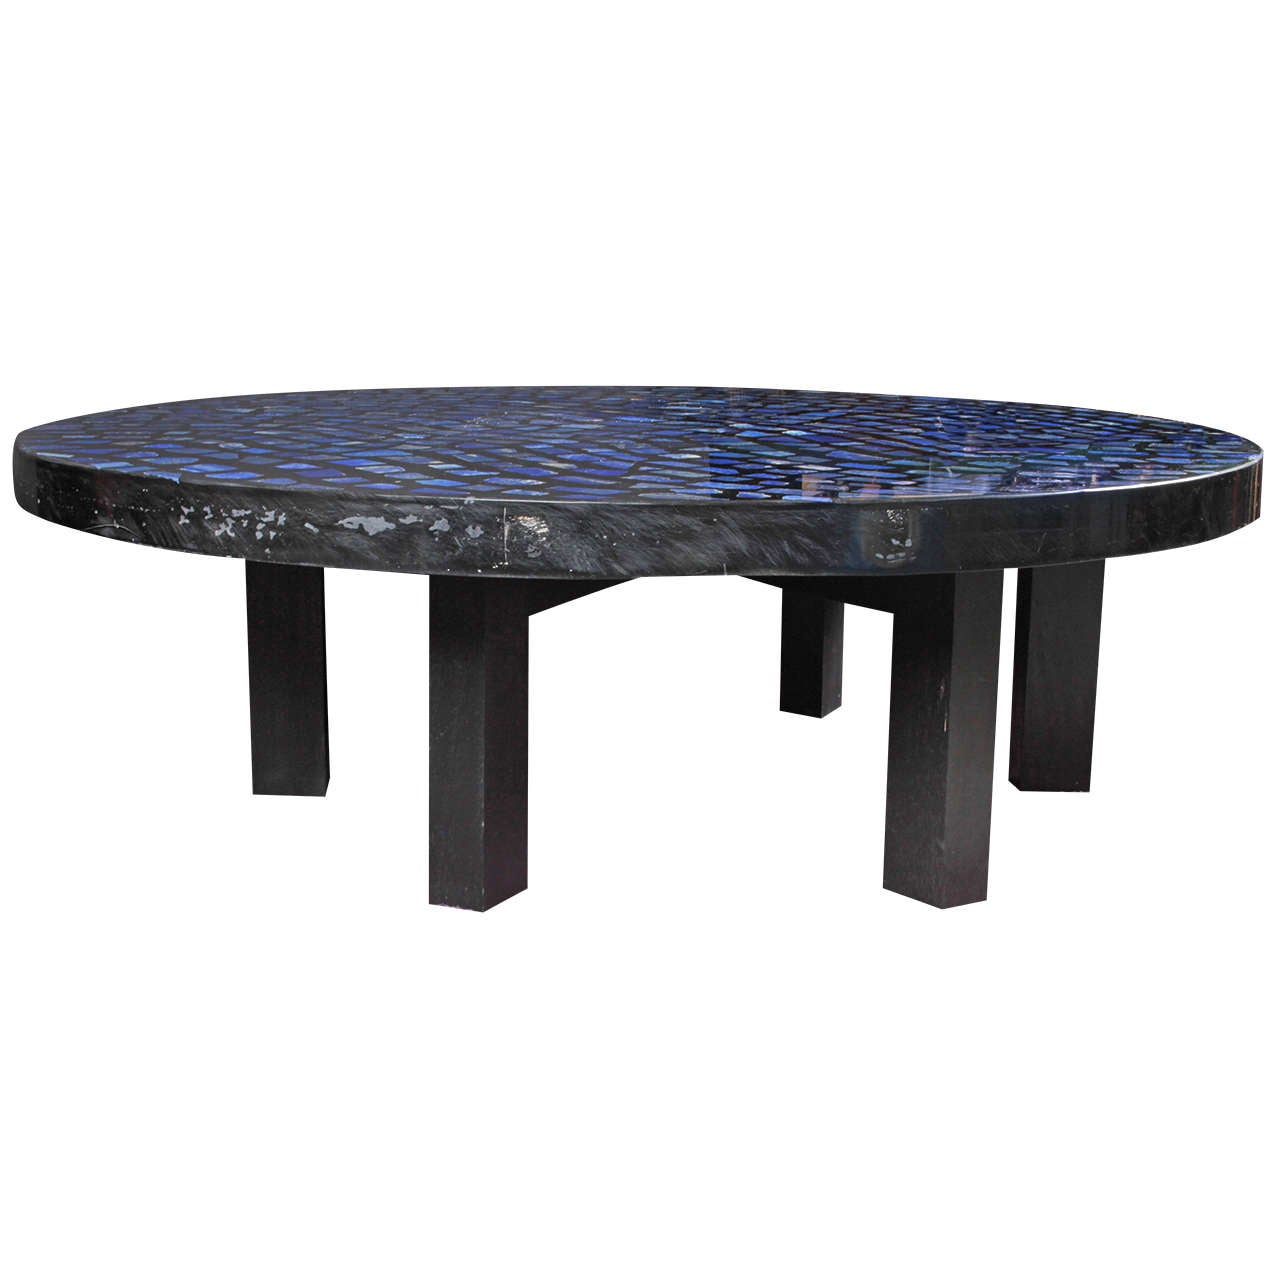 Very impressive Lapis Lazuli and resin circular coffee table by E. Allemeersch.
The table is peculiar by the shade of blues that varies and dances with the light.
The item is signed by the artist. 

Excellent condition.